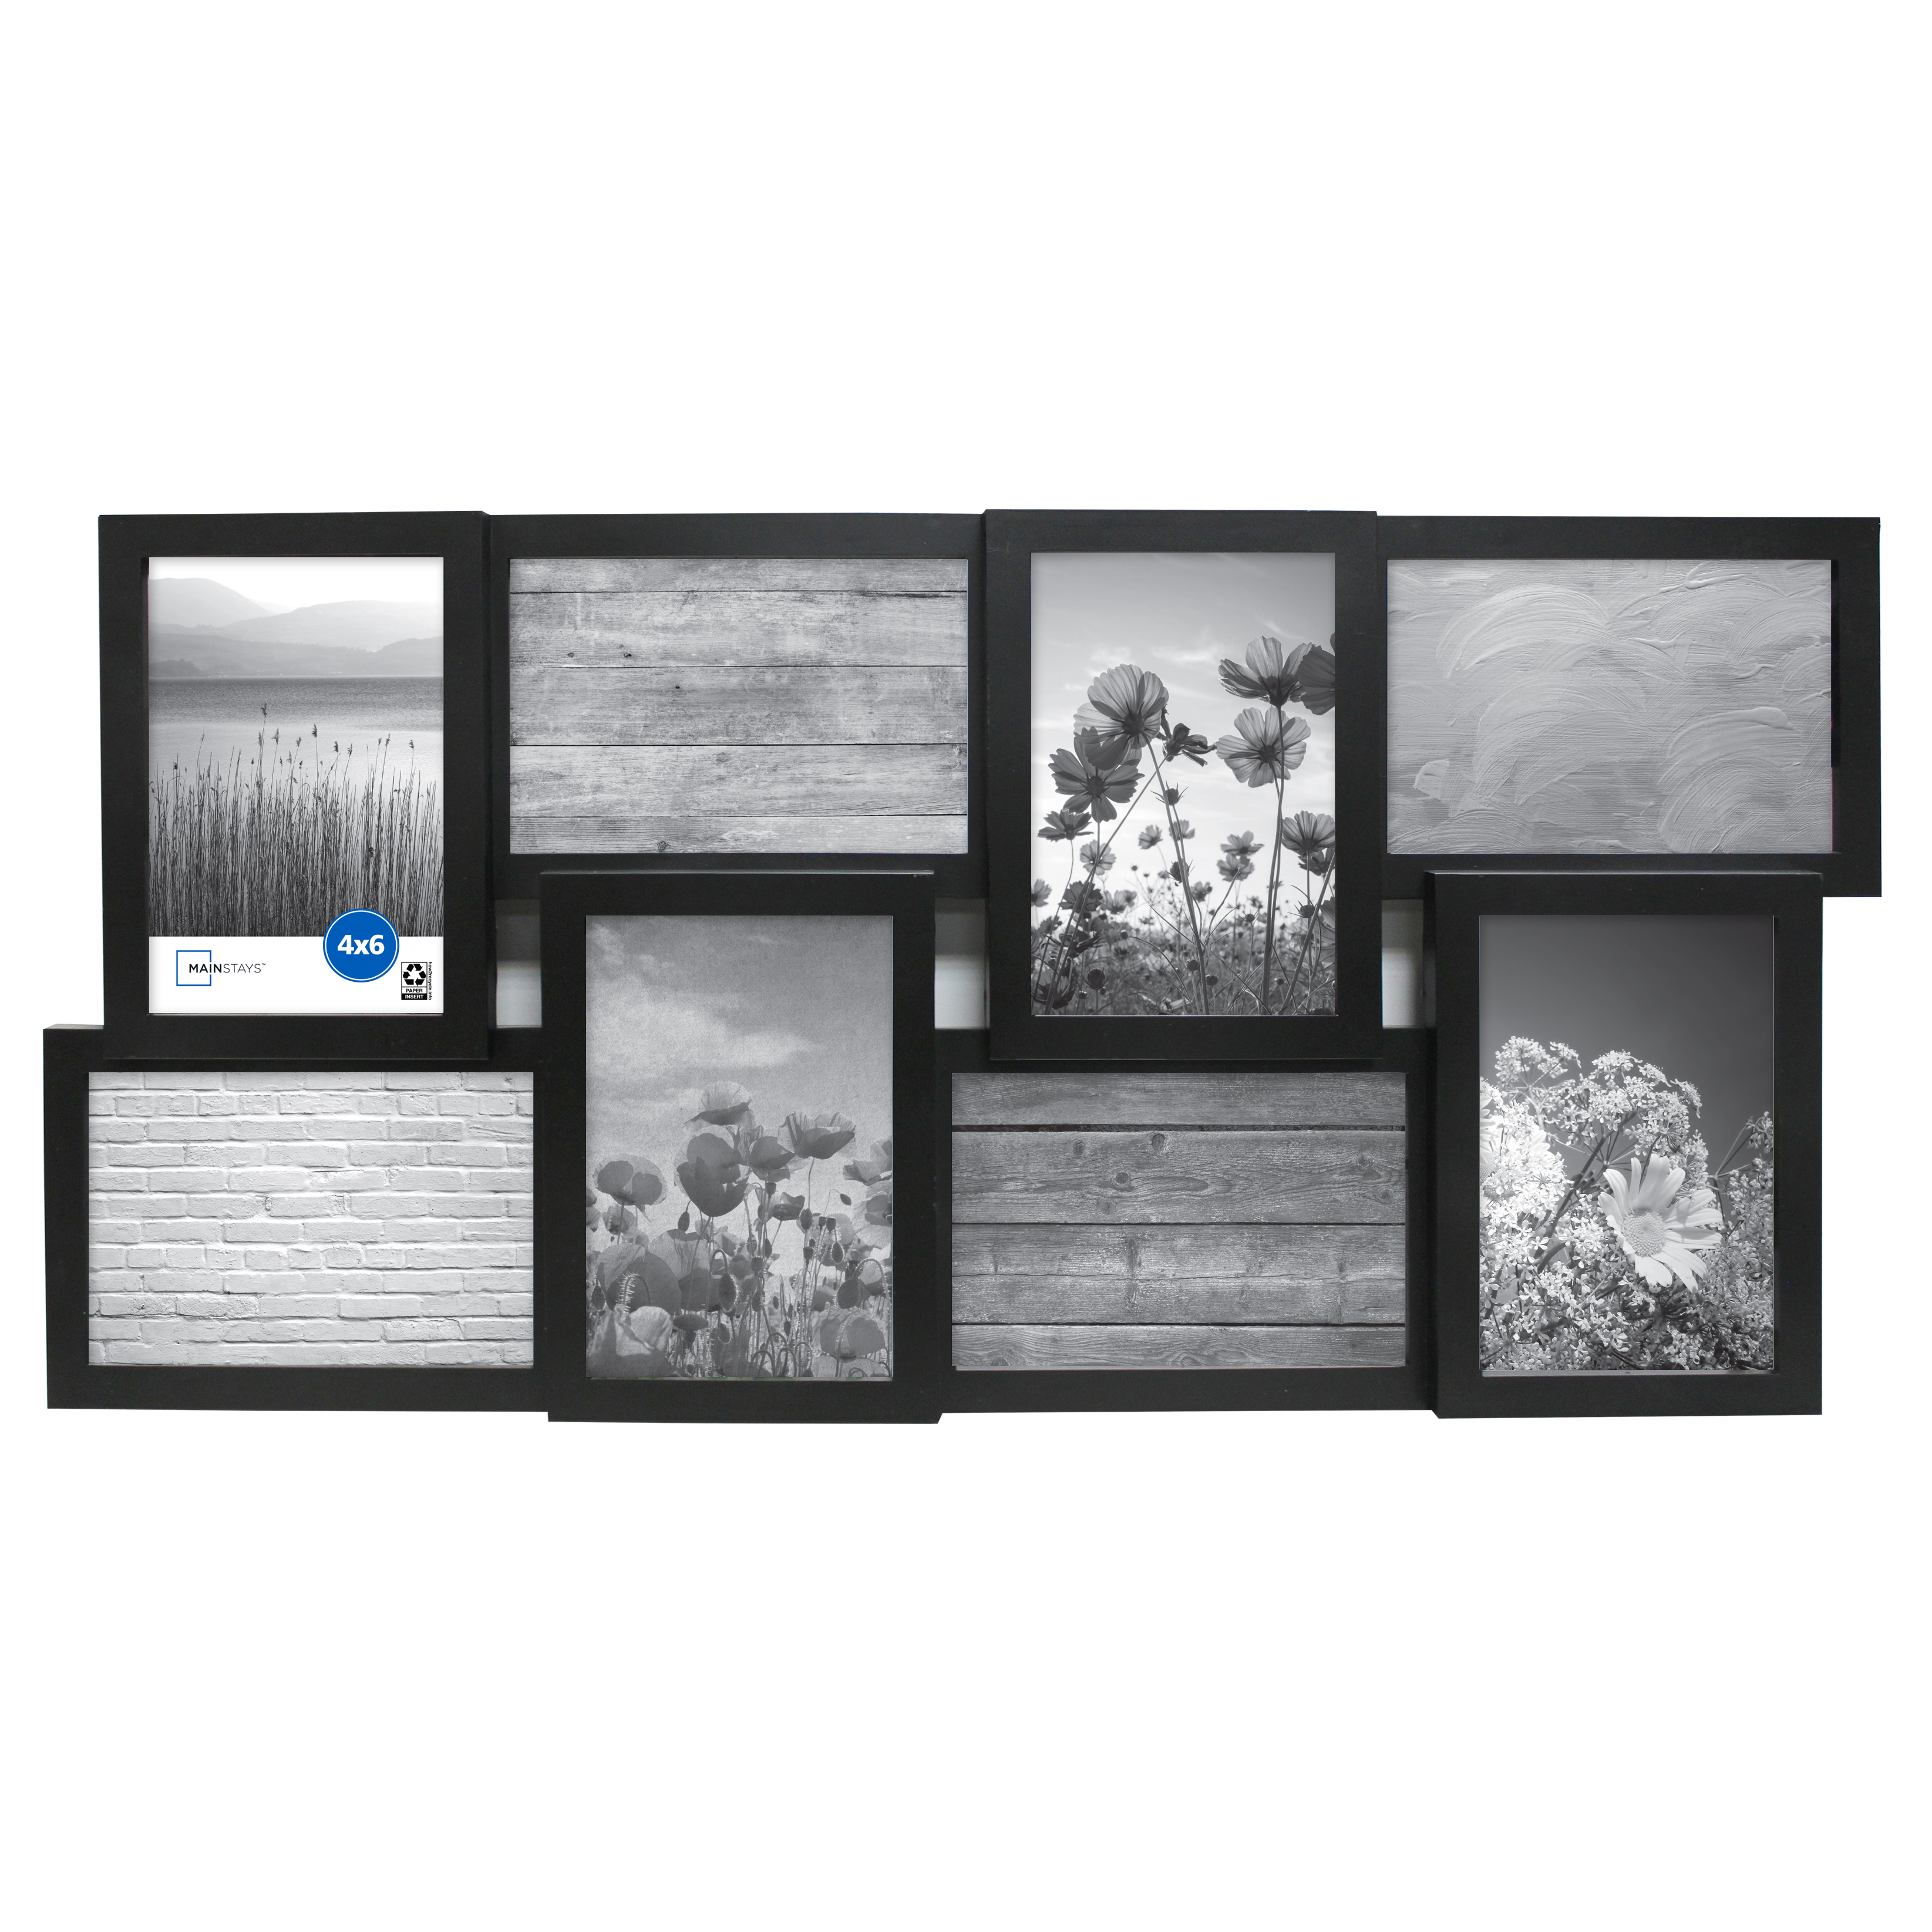 Mainstays 8-Opening 4x6 Linear Black Collage Picture Frame - Walmart.com